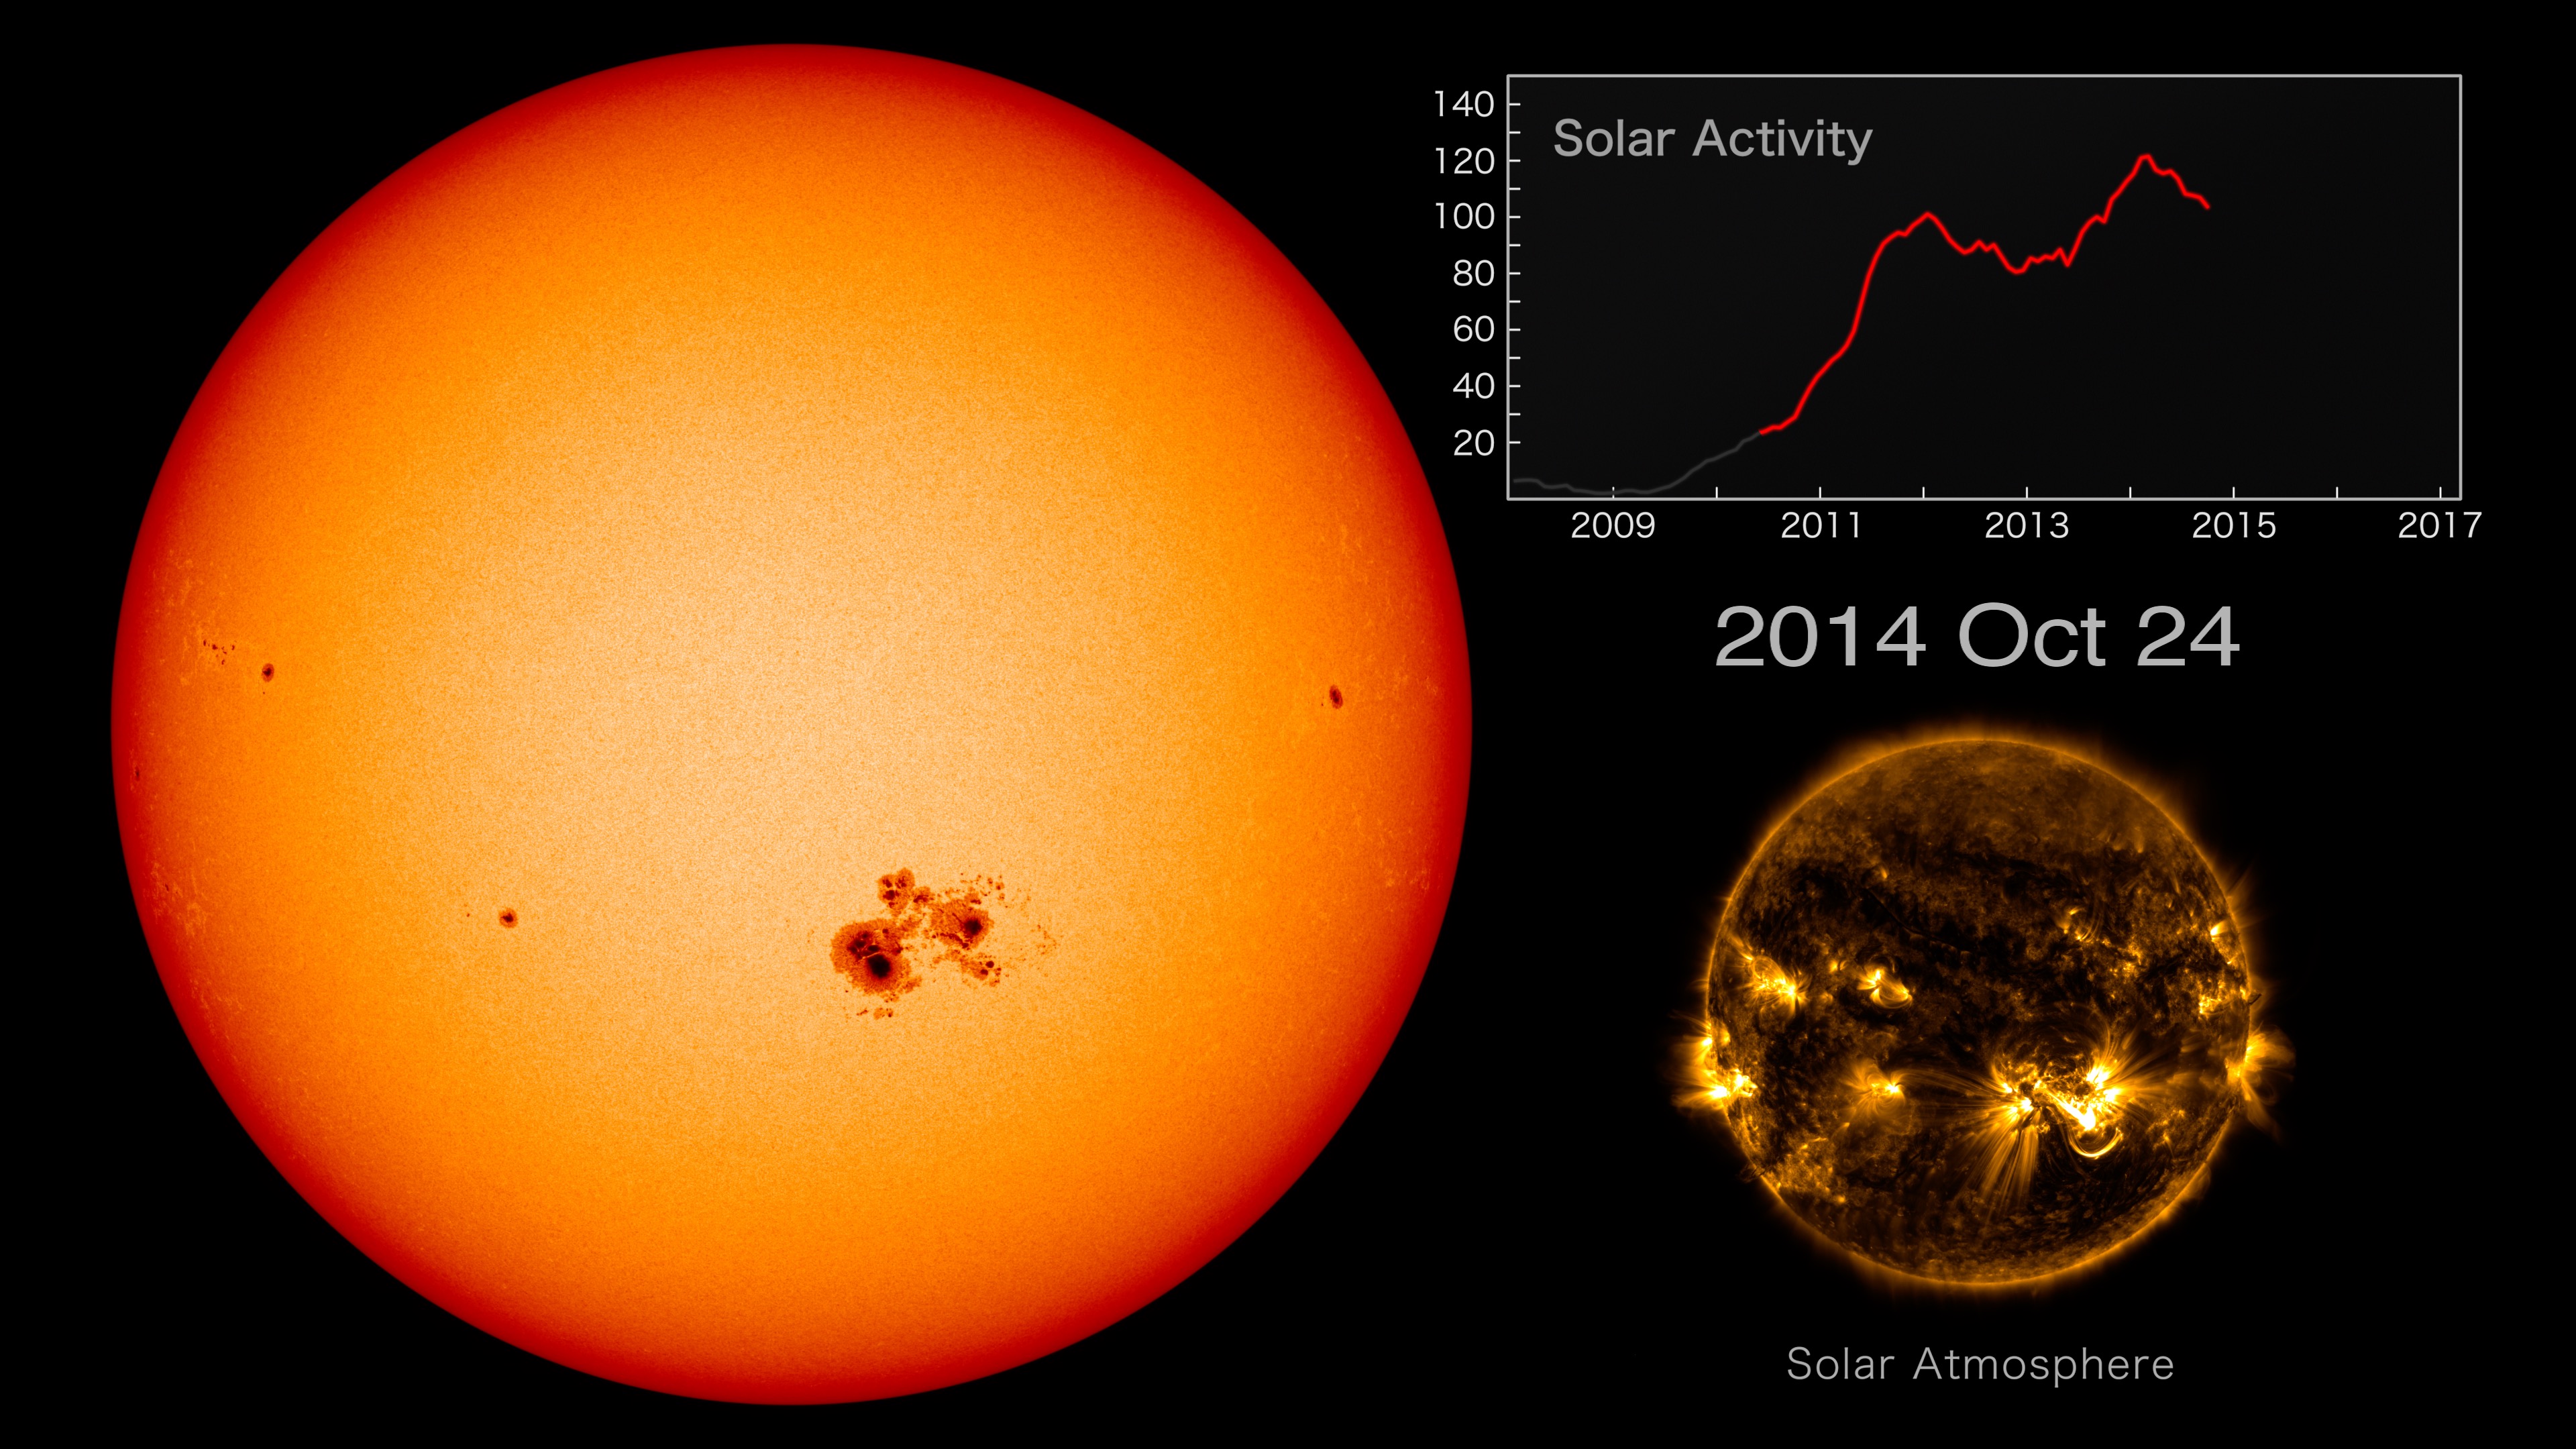 The Solar Dynamics Observatory, or SDO, has now captured nearly seven years worth of ultra-high resolution solar footage.  This time lapse shows that full run from two of SDO's instruments.  The large orange sun is visible light captured by the Helioseismic and Magnetic Imager, or HMI.  The smaller golden sun is extreme ultraviolet light from the Atmospheric Imaging Assembly, or AIA, and reveals some of the sun's atmosphere, the corona.  Both appear at one frame every 12 hours. SDO's nearly unbroken run is now long enough to watch the rise and fall of the current solar cycle.  The graph of solar activity shows the sunspot number, a measurement based on the number of individual spots and the number of sunspot groups.  In this case, the line represents a smoothed 26-day average to more clearly show the overall trend.Music: "Web of Intrigue" from Killer TracksWatch this video on the NASA Goddard YouTube channel.Complete transcript available.